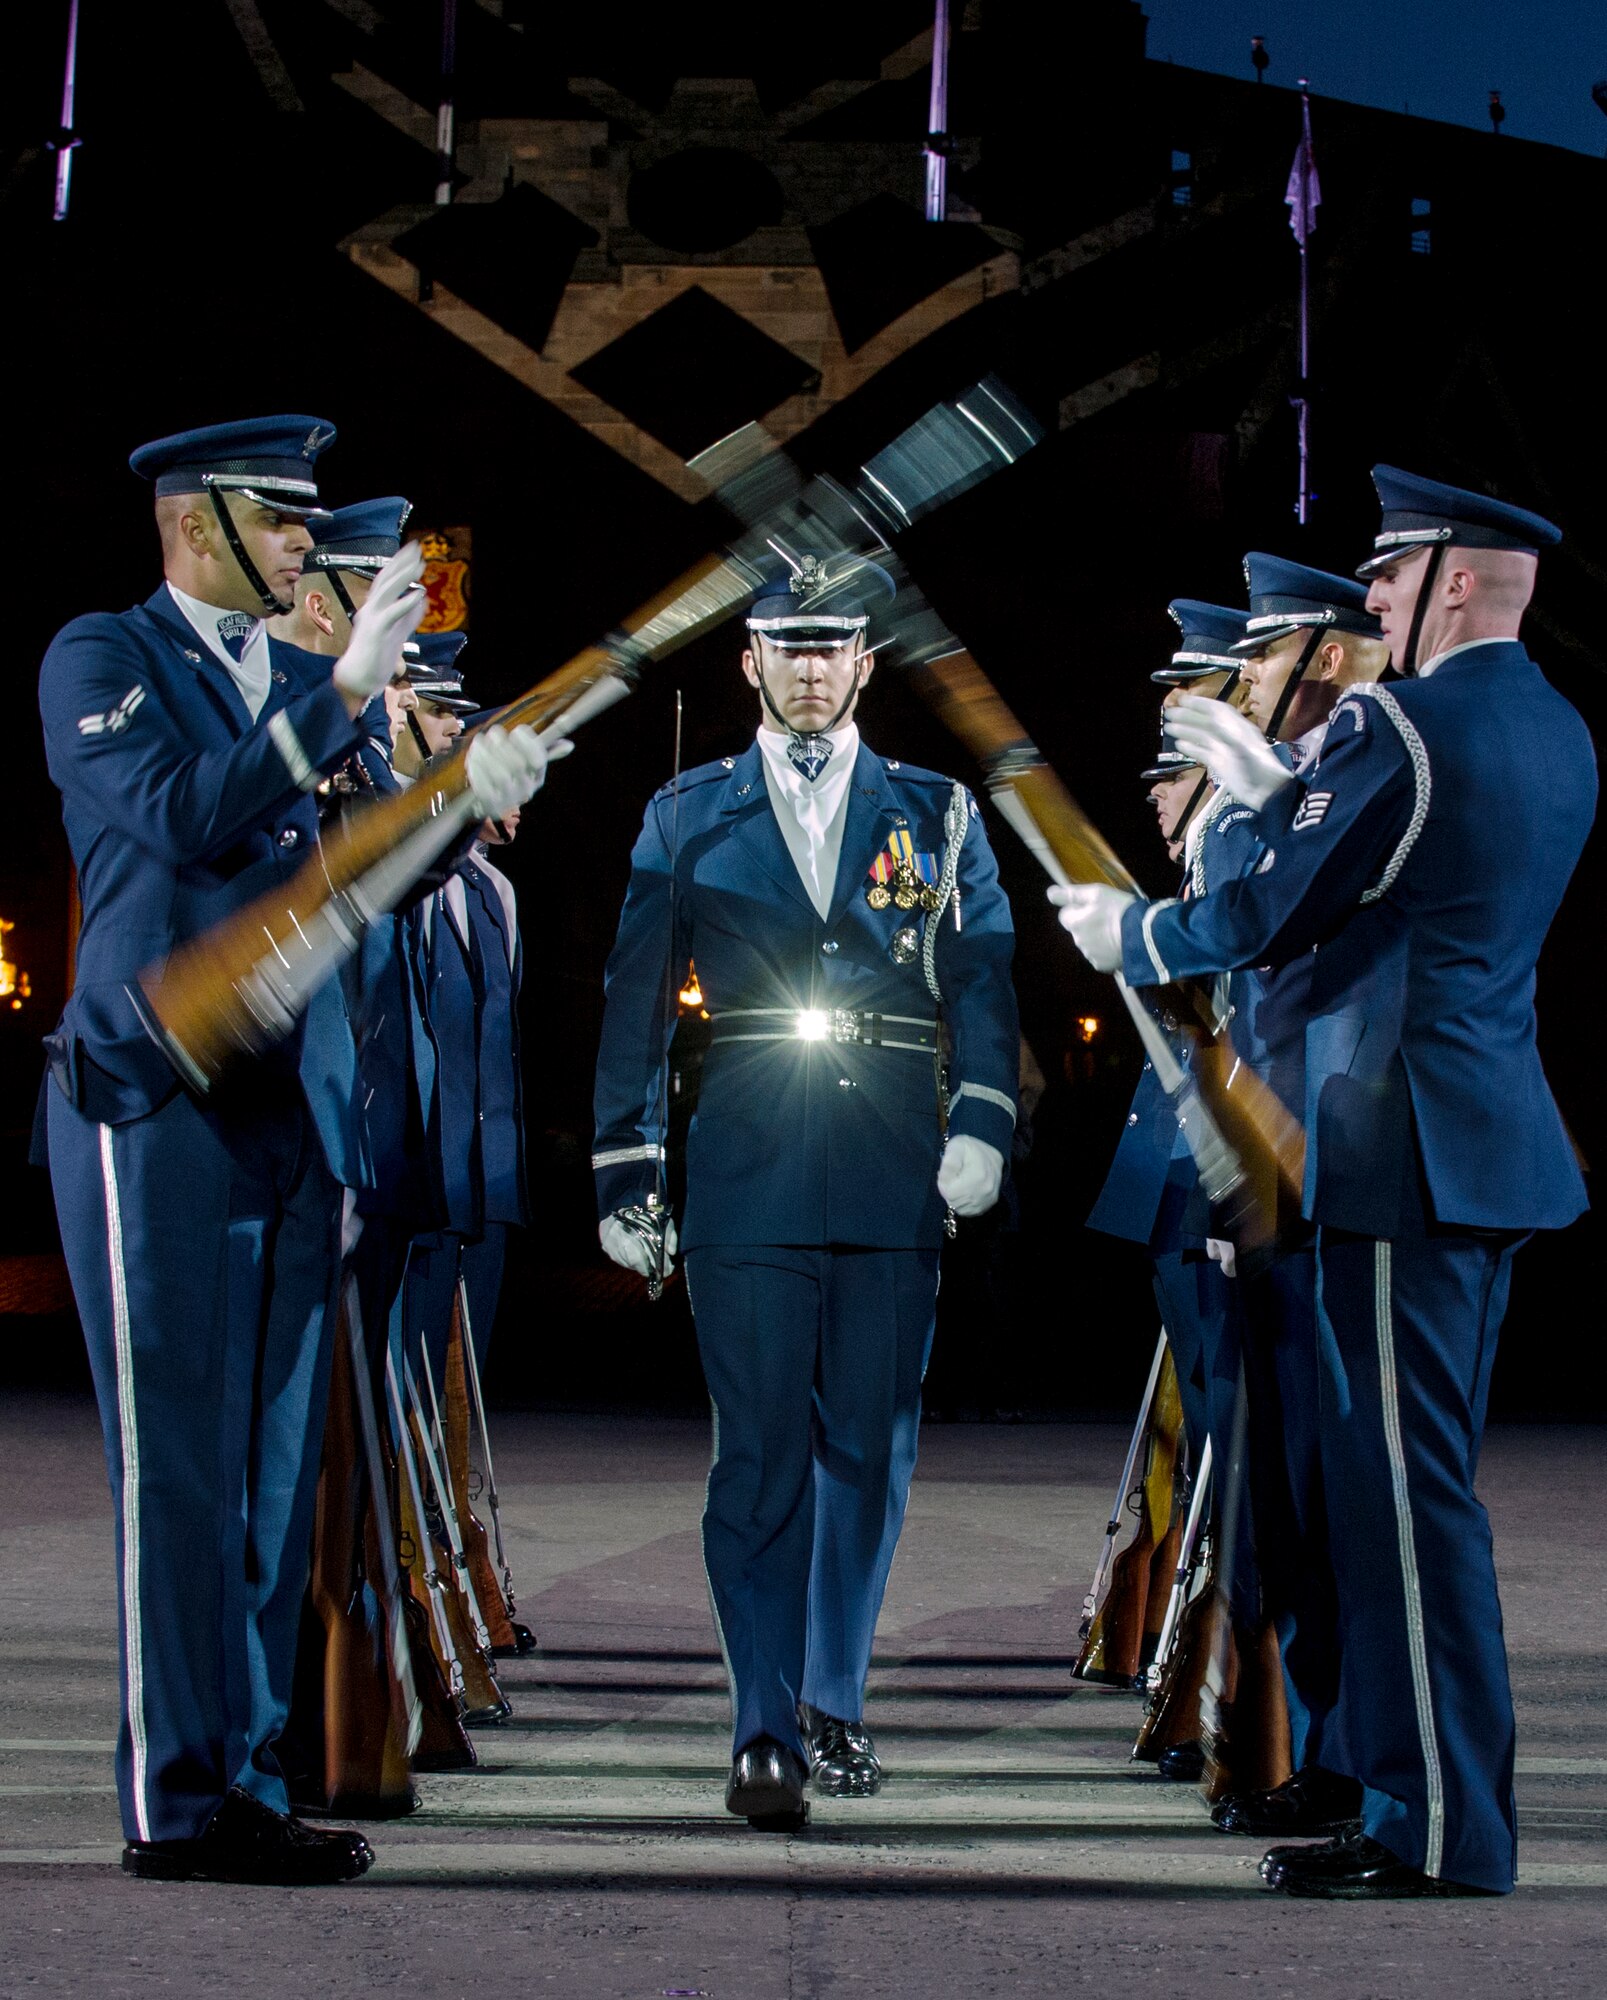 The United States Air Force Honor Guard Drill Team performs the walkthrough during The Royal Edinburgh Military Tattoo on the Esplanade of the Edinburgh Castle in Edinburgh, Scotland Aug. 6, 2015. This is the 66th production of the tattoo and it welcomes more than 220,000 spectators from around the world for more than 3 weeks. (U.S. Air Force photo/Staff Sgt. Nichelle Anderson/Released)